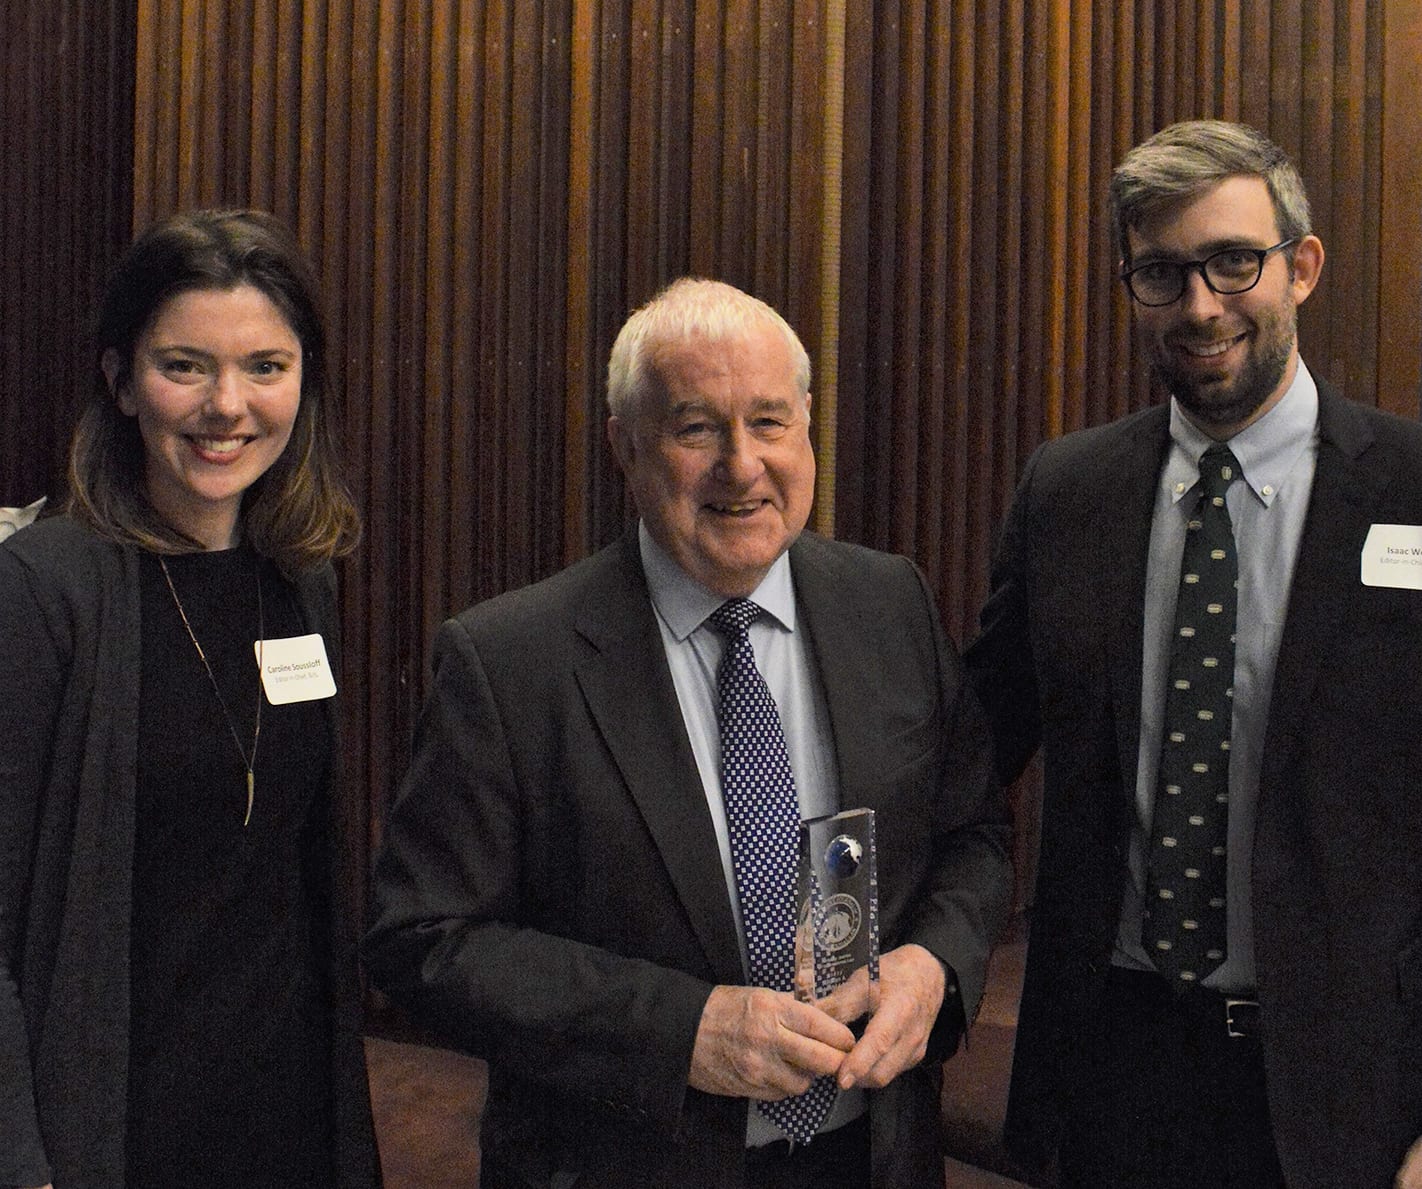 Guy Goodwin-Gill with BJIL Co-Editors-in-Chief Caroline Caroline Soussloff and Isaac Webb